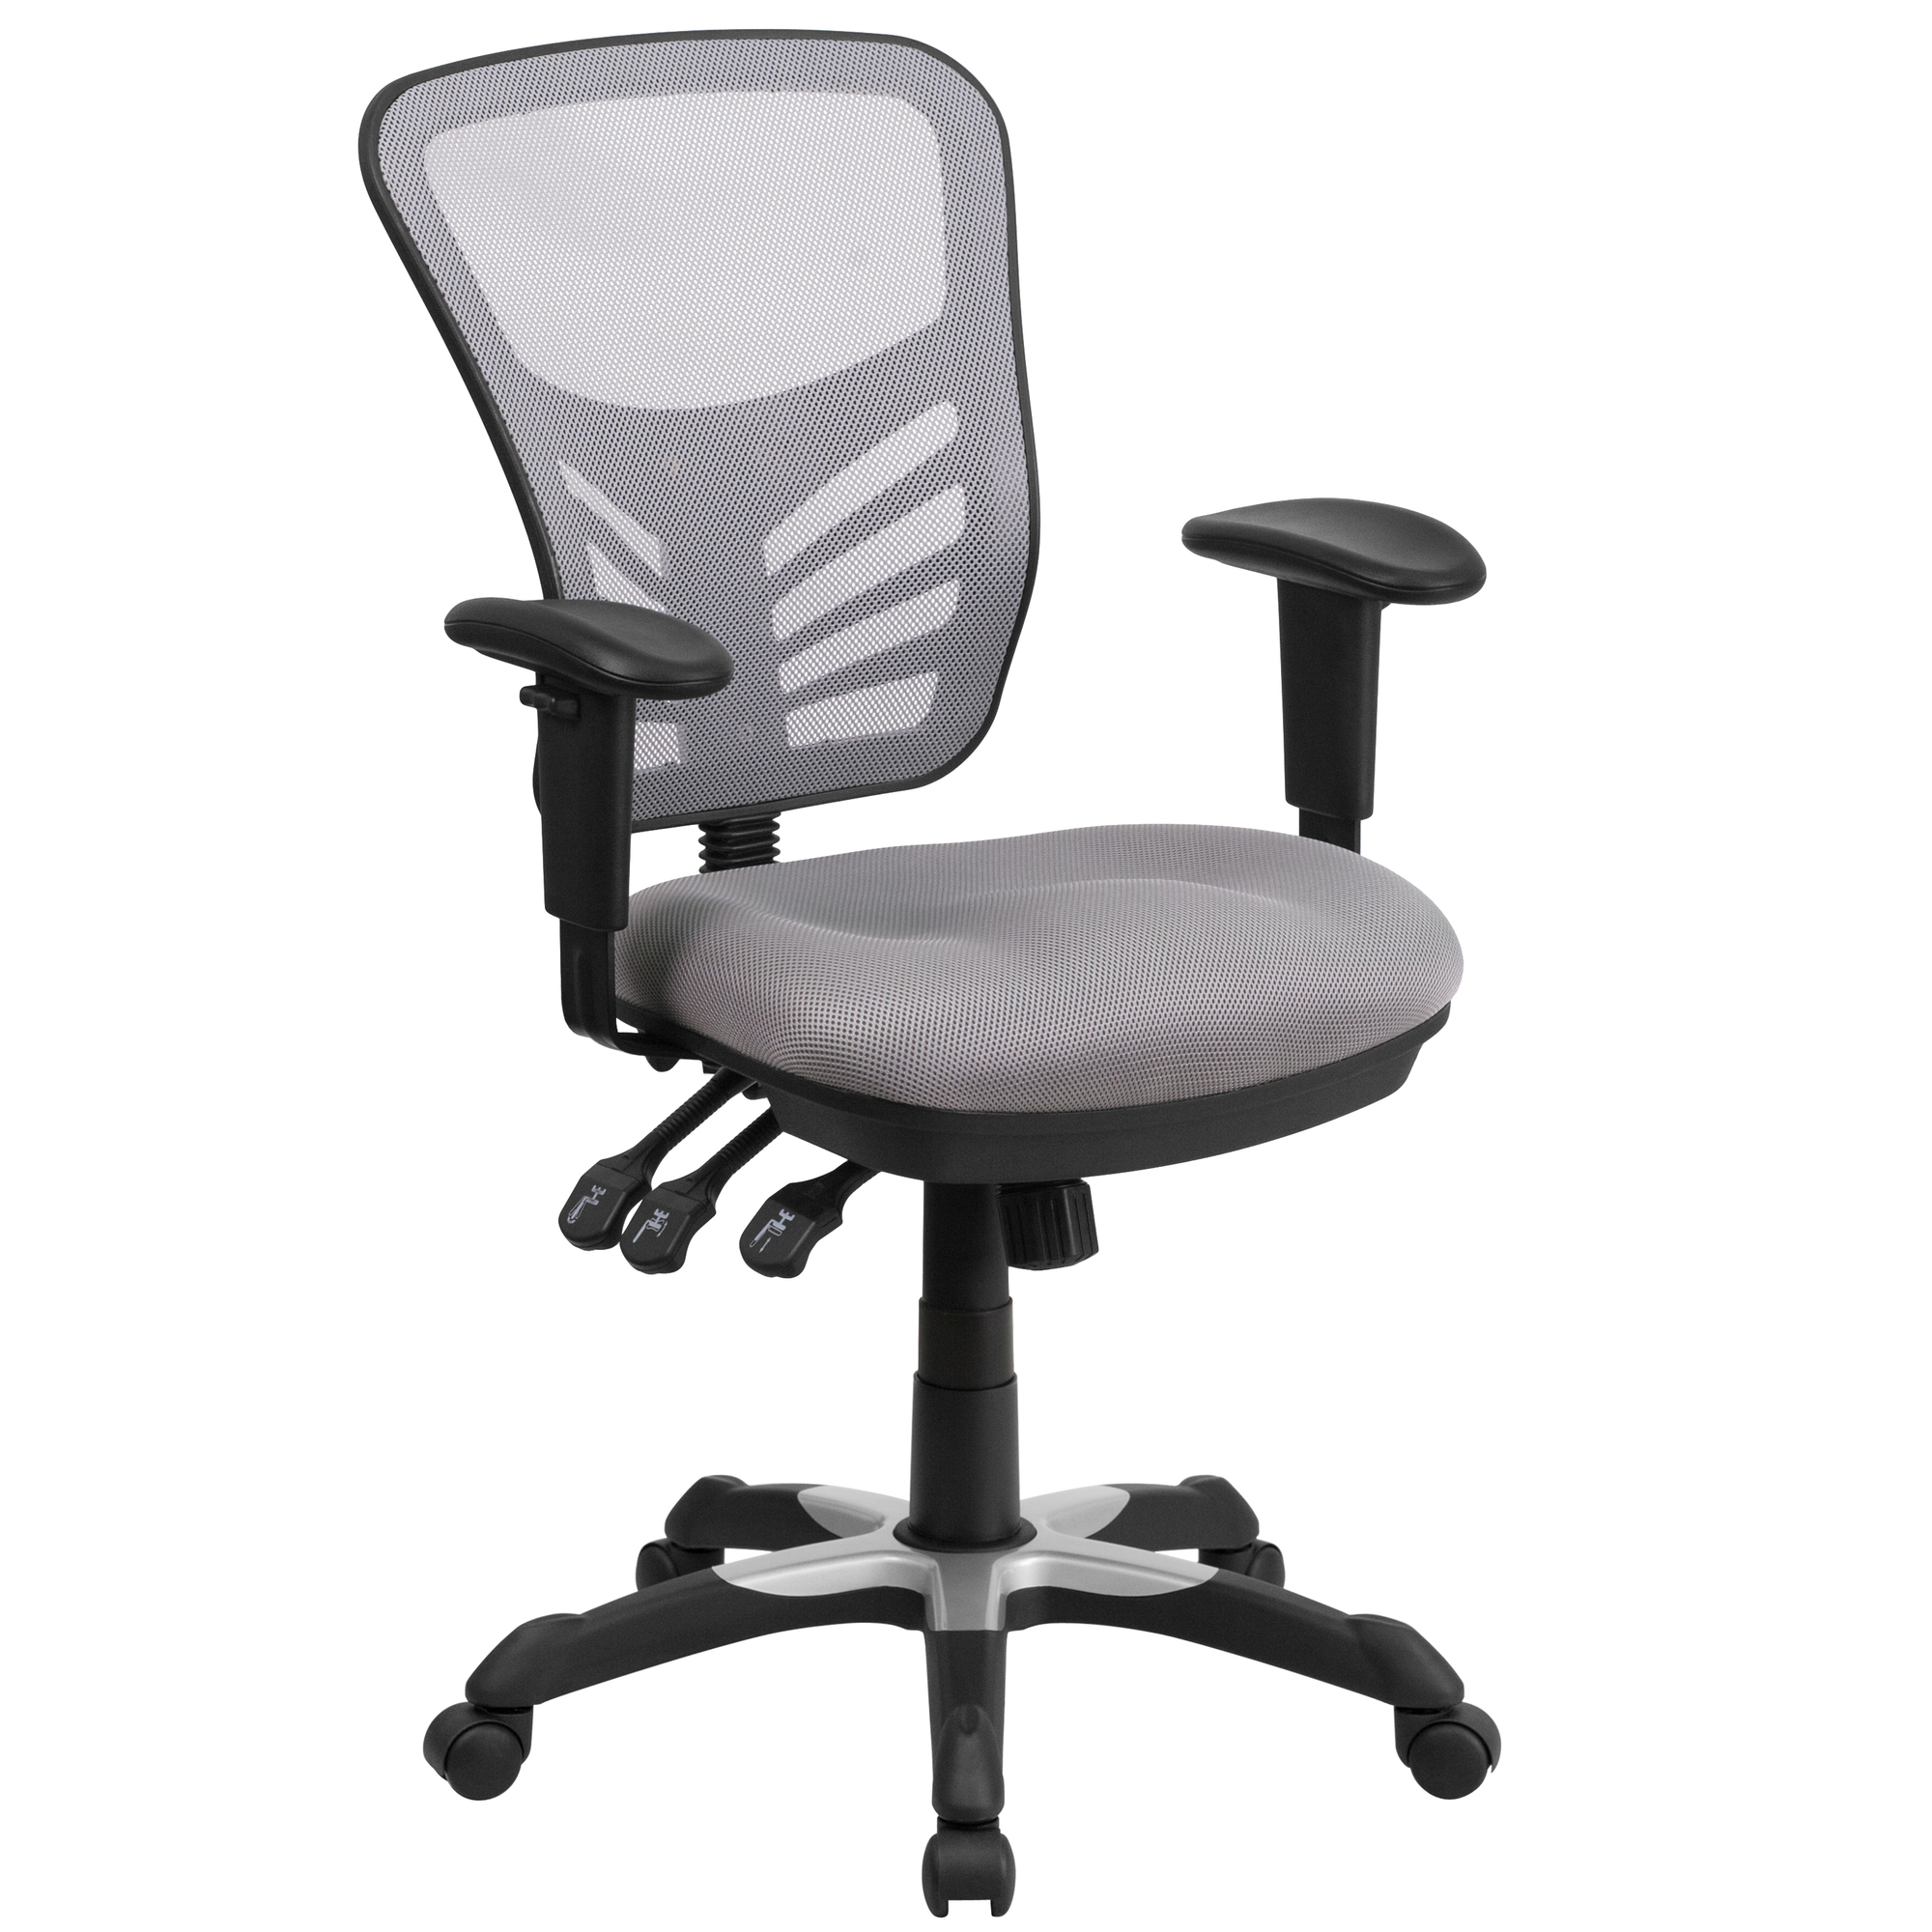 Mid-Back Gray Mesh Multifunction Office Chair, Primary Color Gray, Included (qty.) 1, Model - Flash Furniture HL0001GY